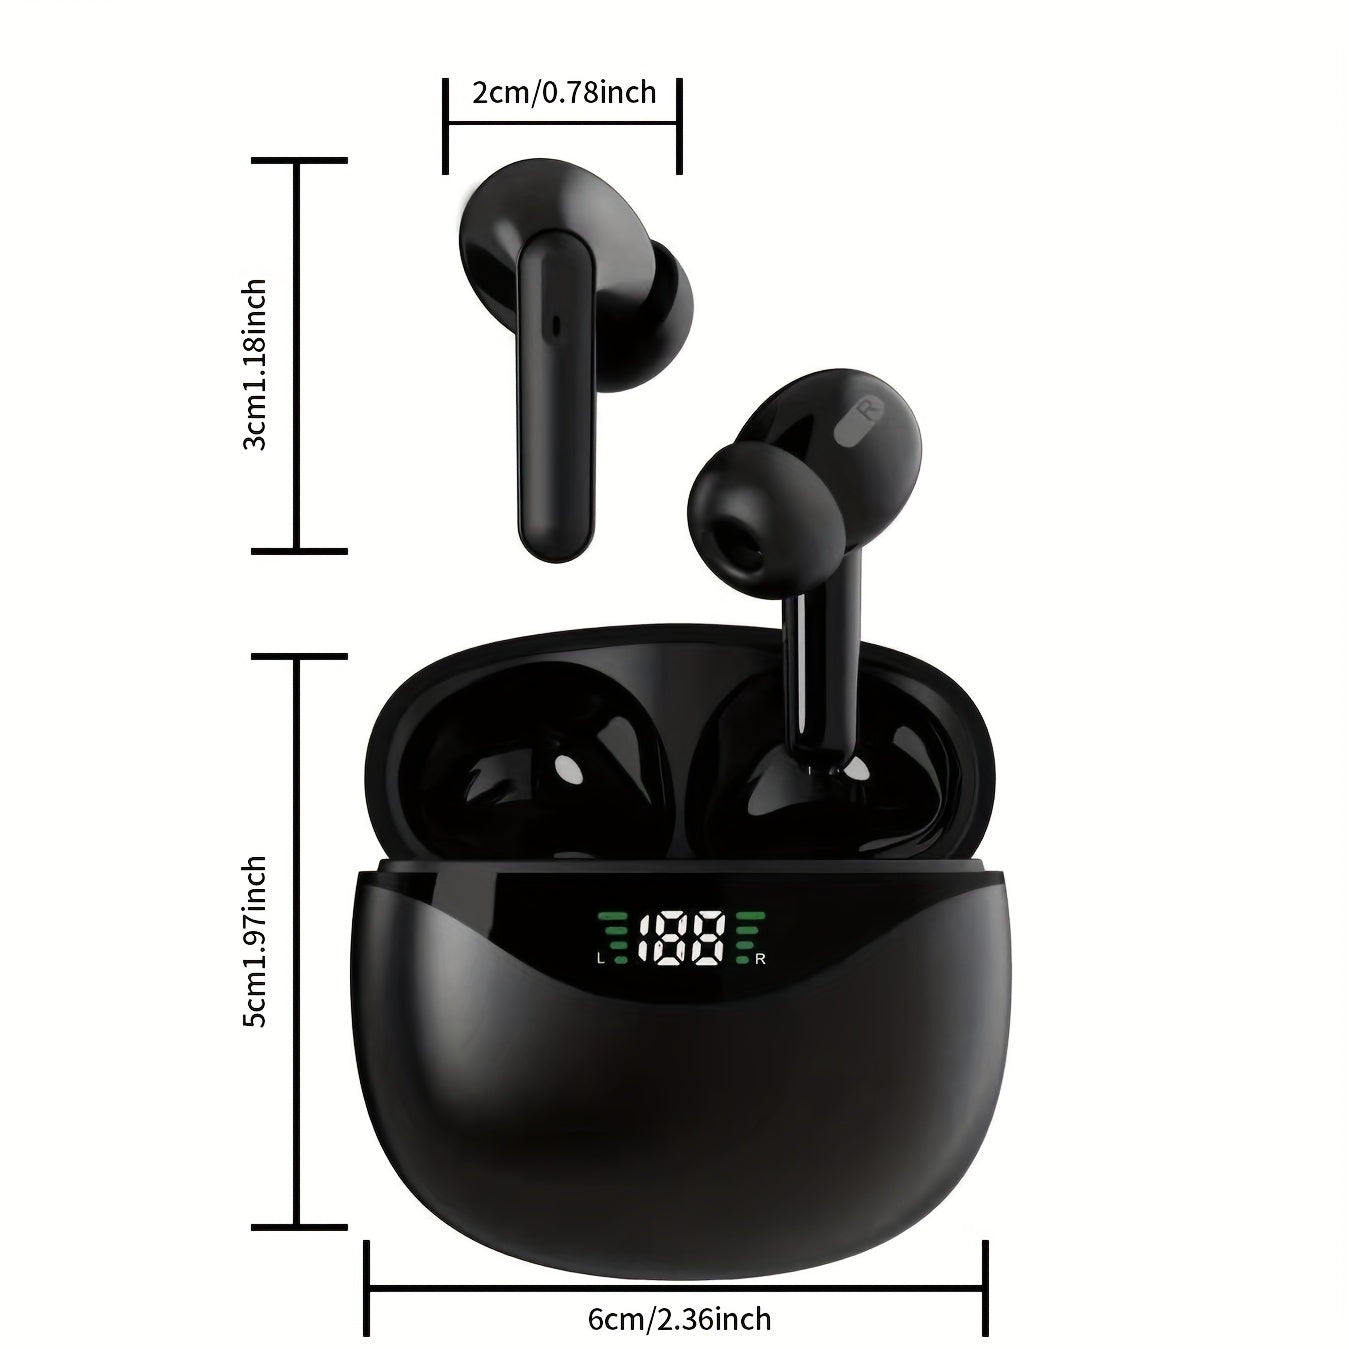 Wireless Earbuds, V5.1  Headphones 30+H Playtime With LED Digital Display Charging Case, IPX7 Waterproof Earphones With Mic For Sports Workout Compatible For IPhone/Android/Pods (Black)